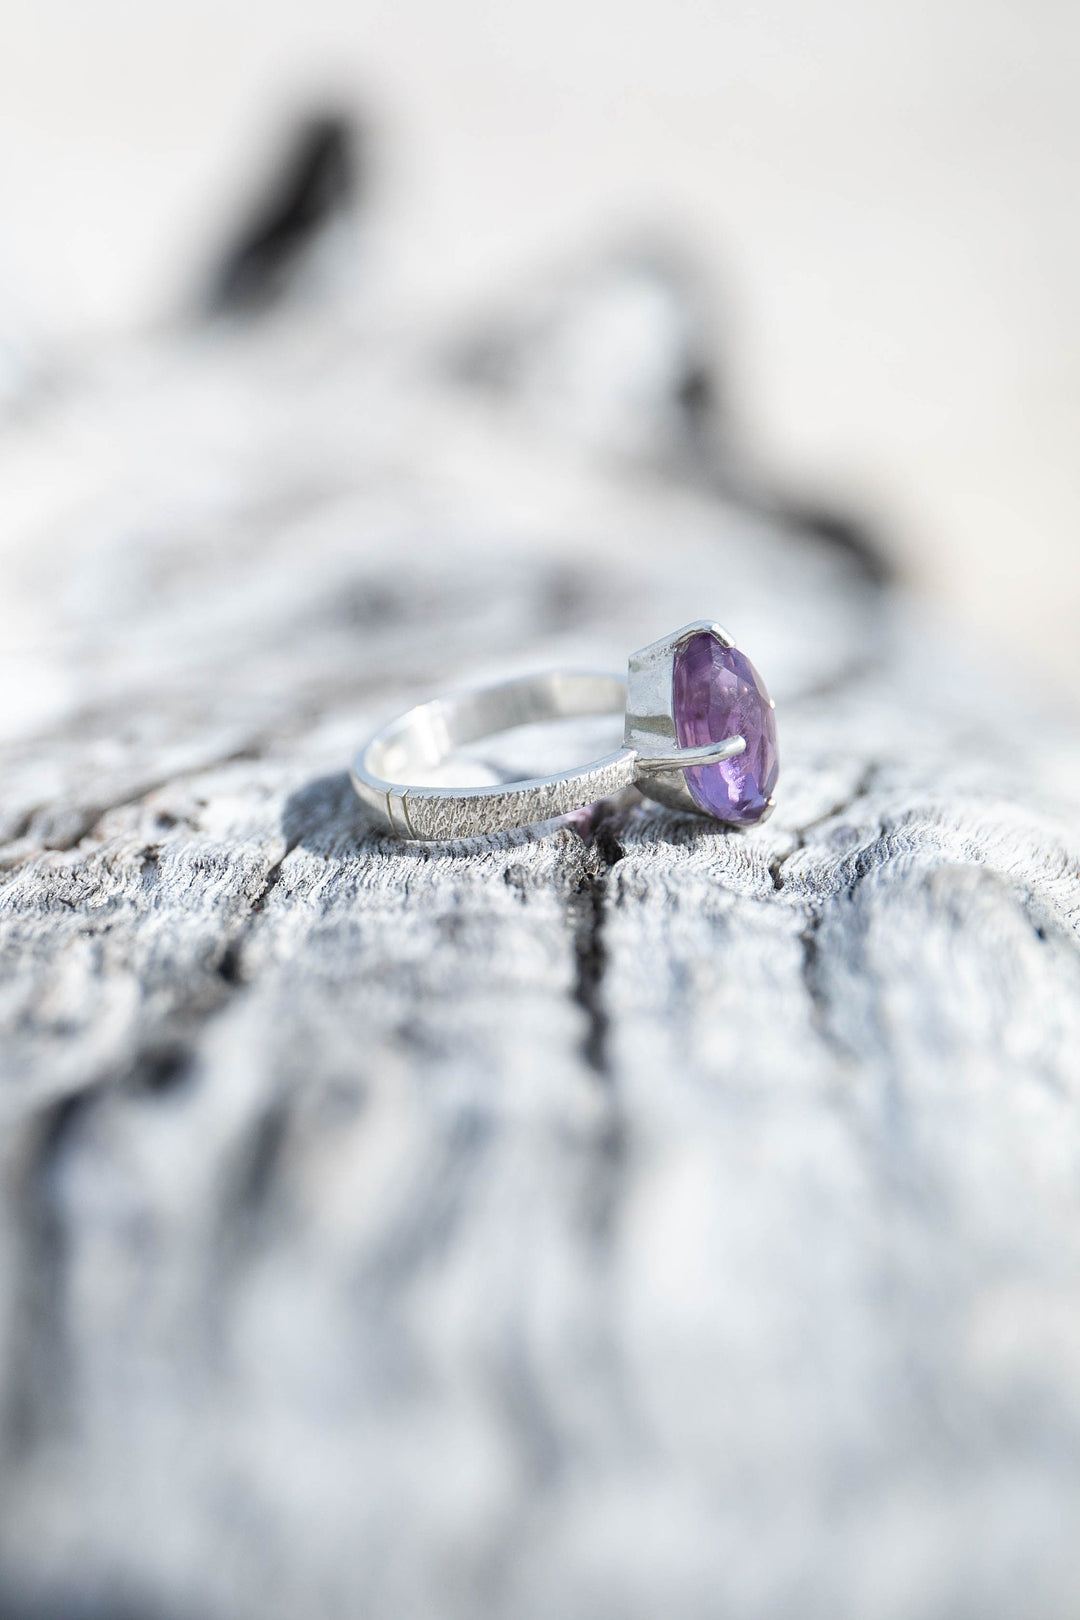 Faceted Teardrop Amethyst Ring in Claw Setting - Size 7.5 US